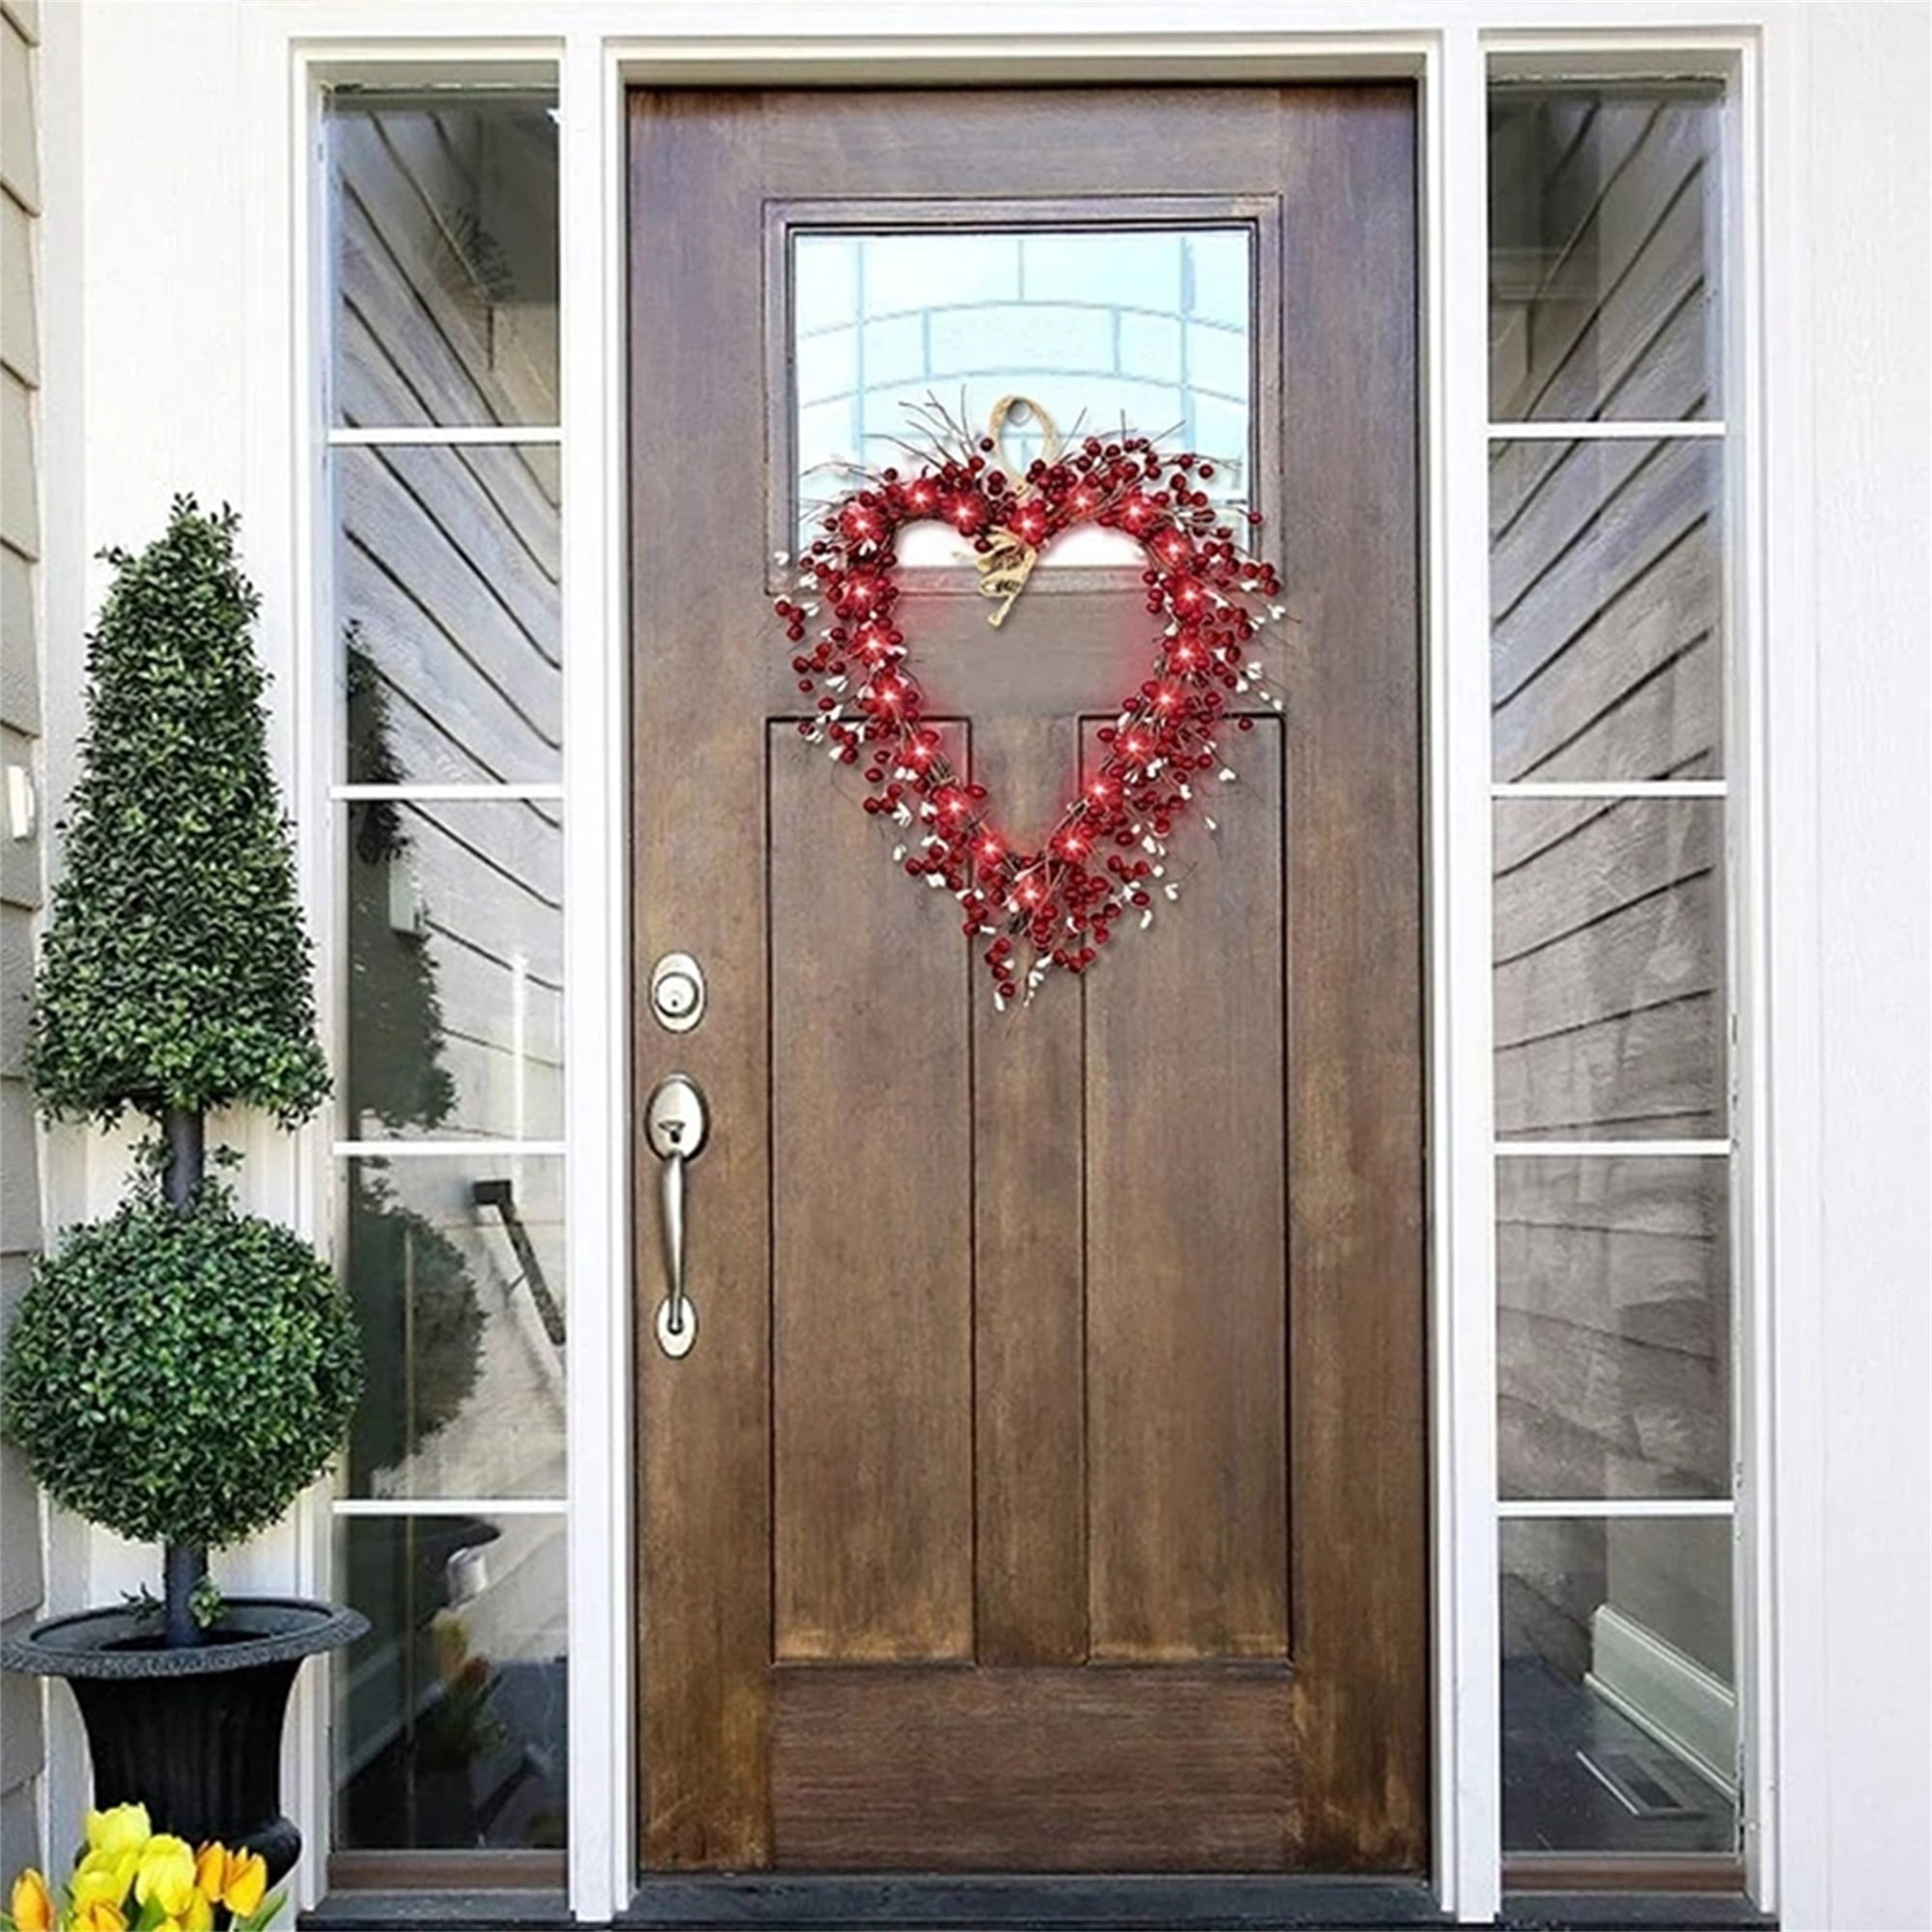 Heart Valentines Wreath for Front Door with Lights,Red Berry Lighted Wreaths for Valentines Day Decor,Artificial Spring Wreath Window Indoor Outdoors